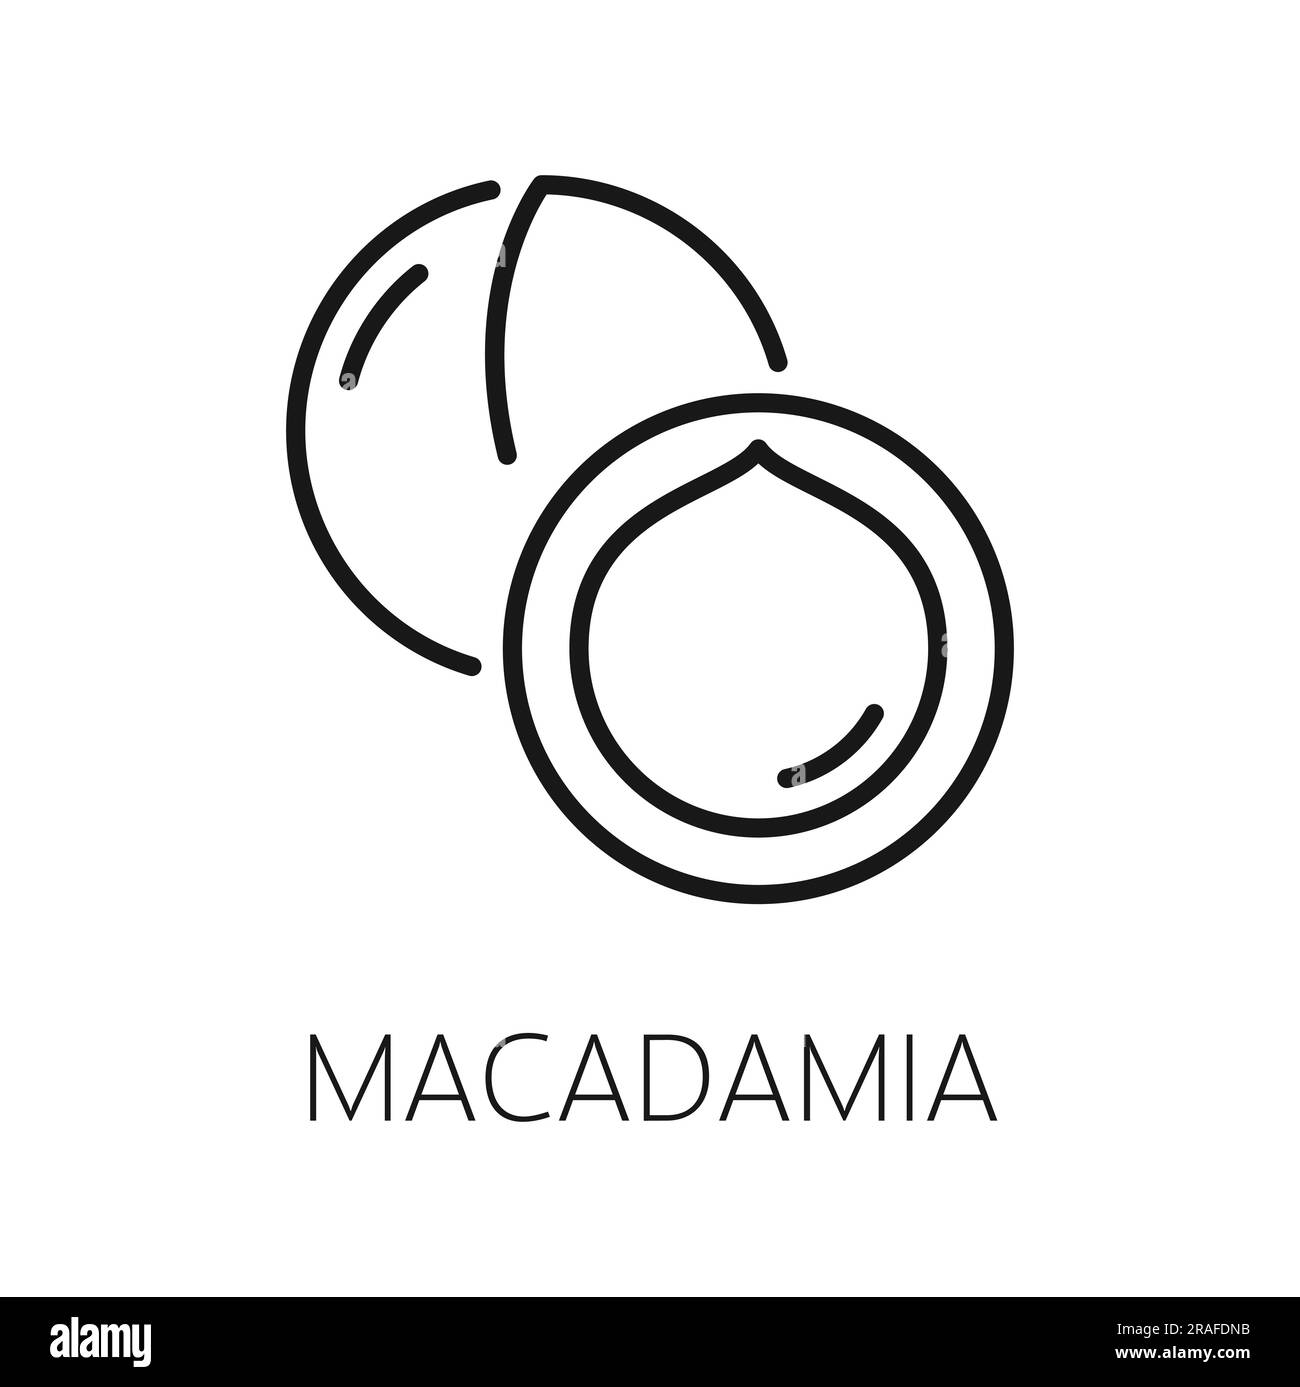 Macadamia nut in shell isolated queensland nut outline icon. Vector bush maroochy bauple nut, exotic tropical dessert tasty snack, thin line Stock Vector